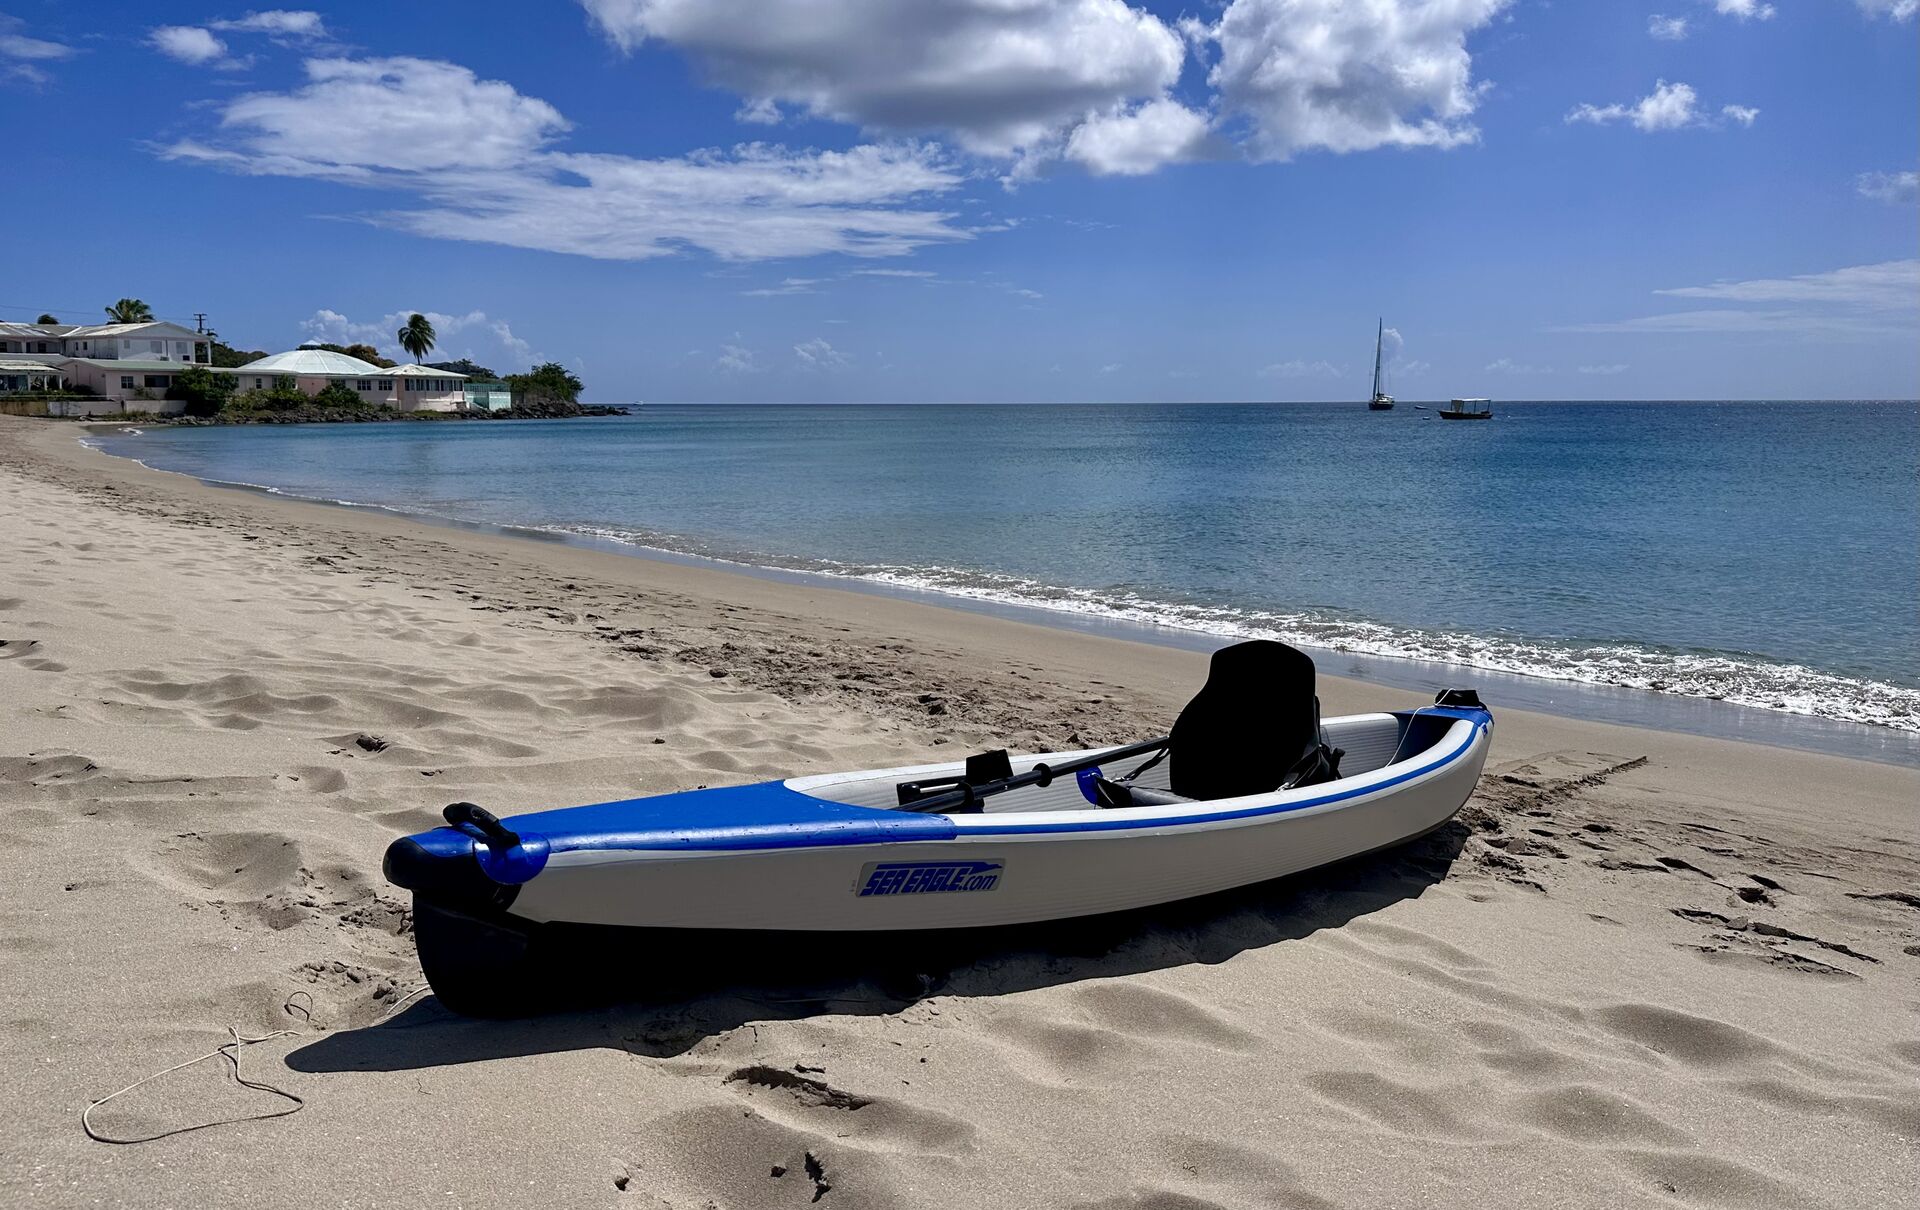 Our trusty kayak on yet another beach.